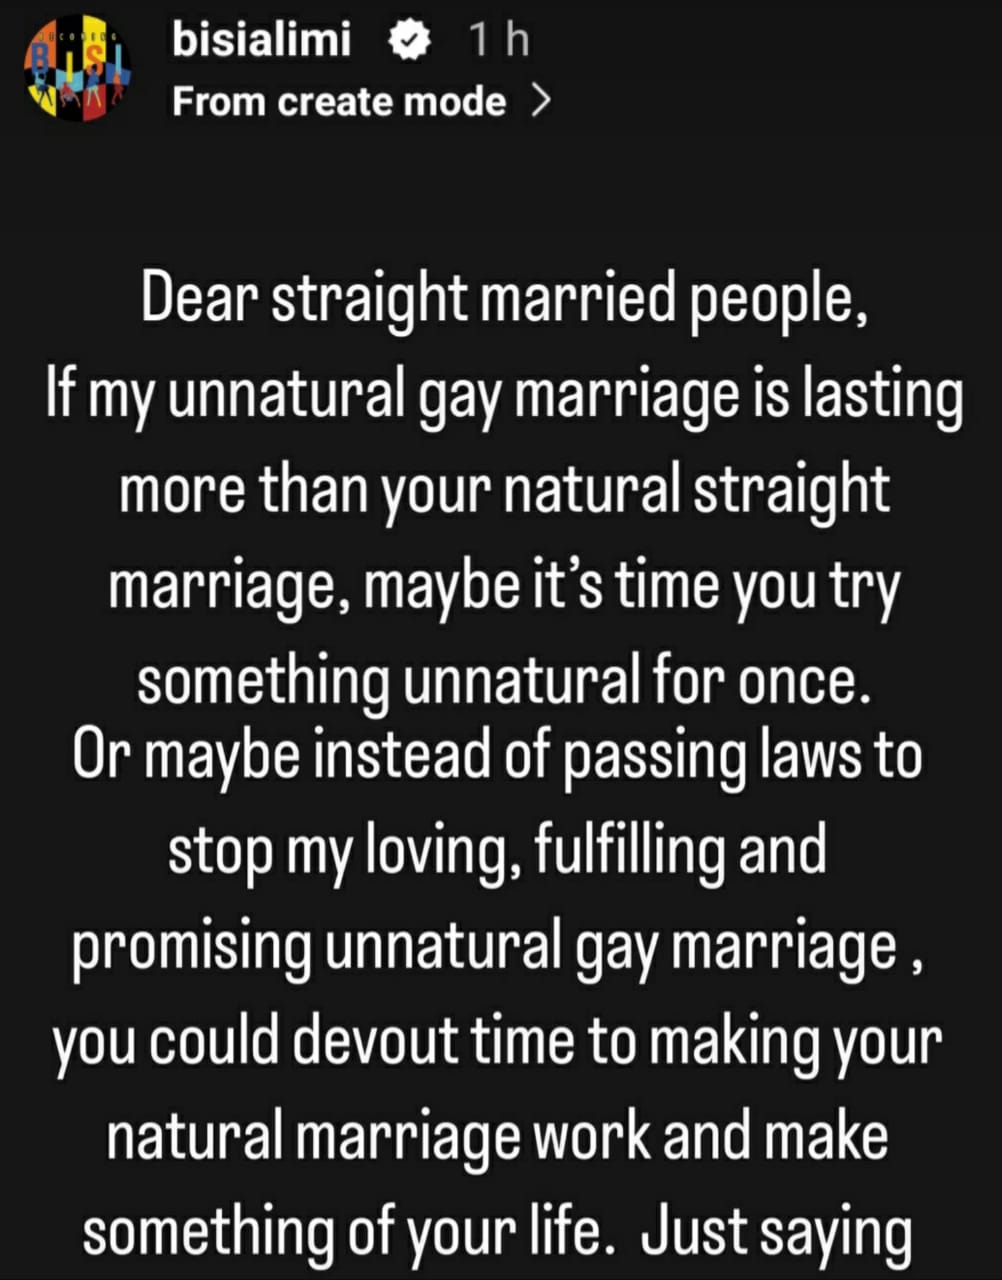 Try something unnatural for once- Bisi Alimi speaks to straight people with failed marriages 